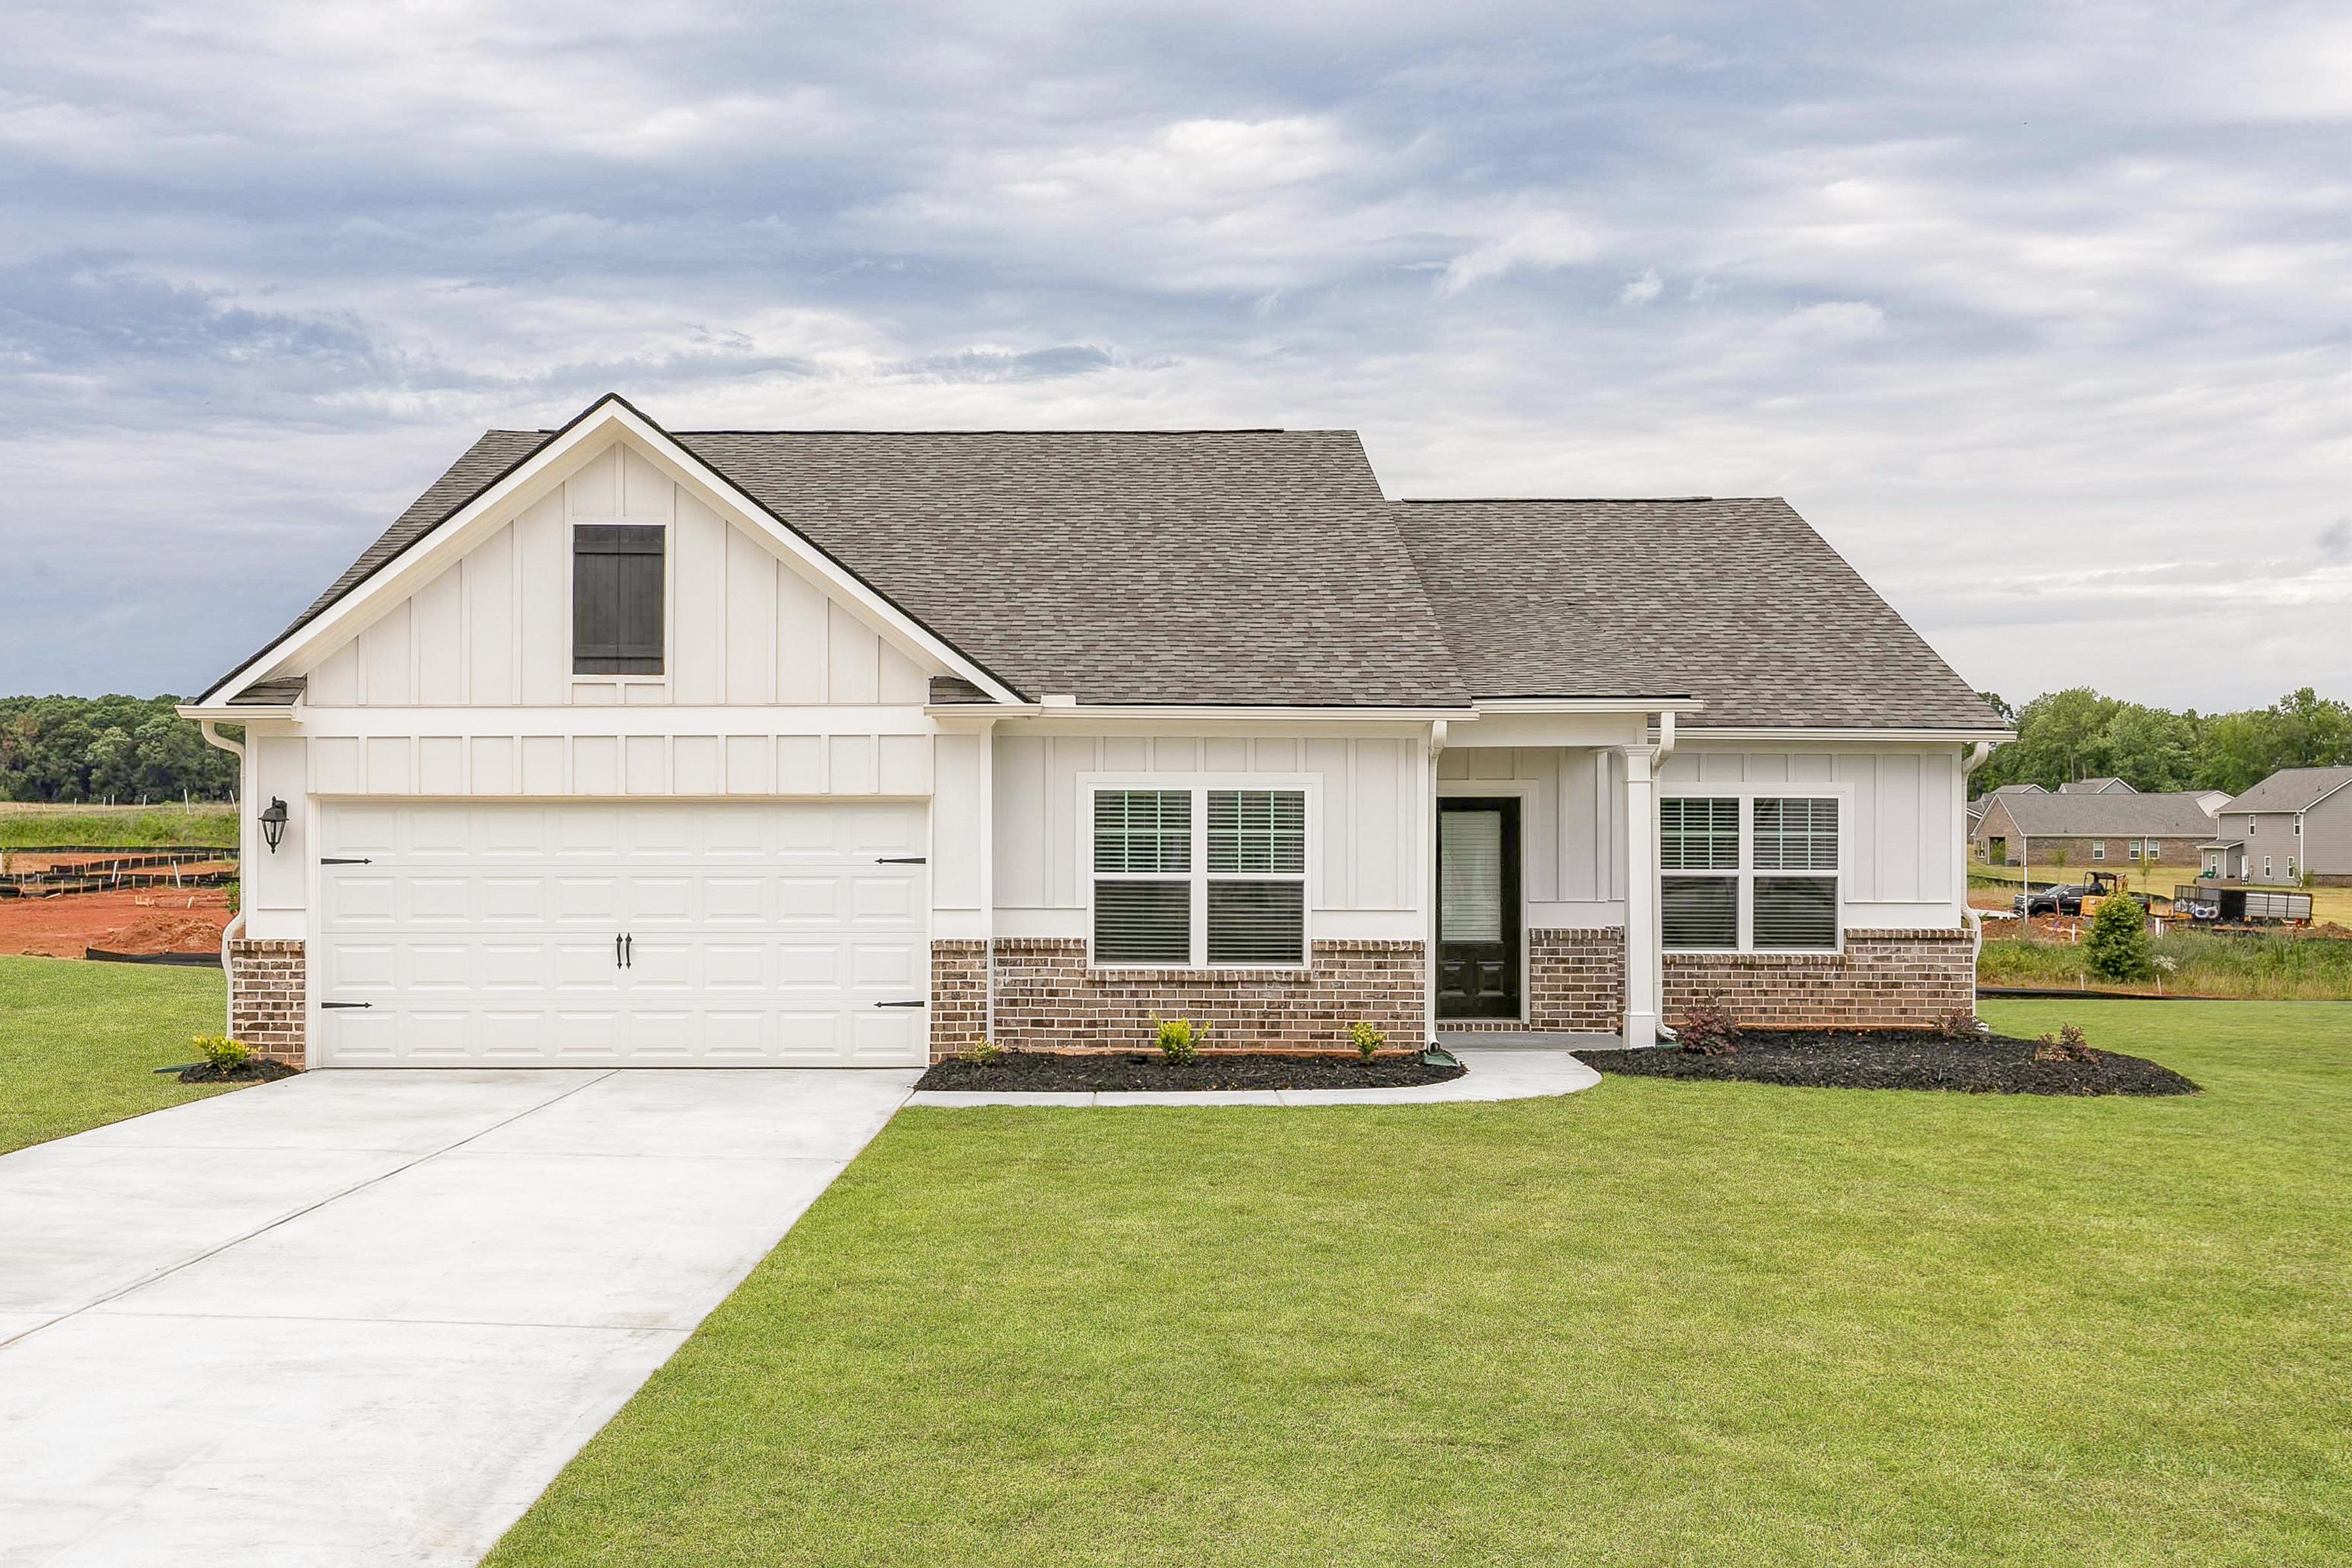 The Dockery is one of many move-in ready homes at Bold Springs Farm near Lawrenceville, GA.